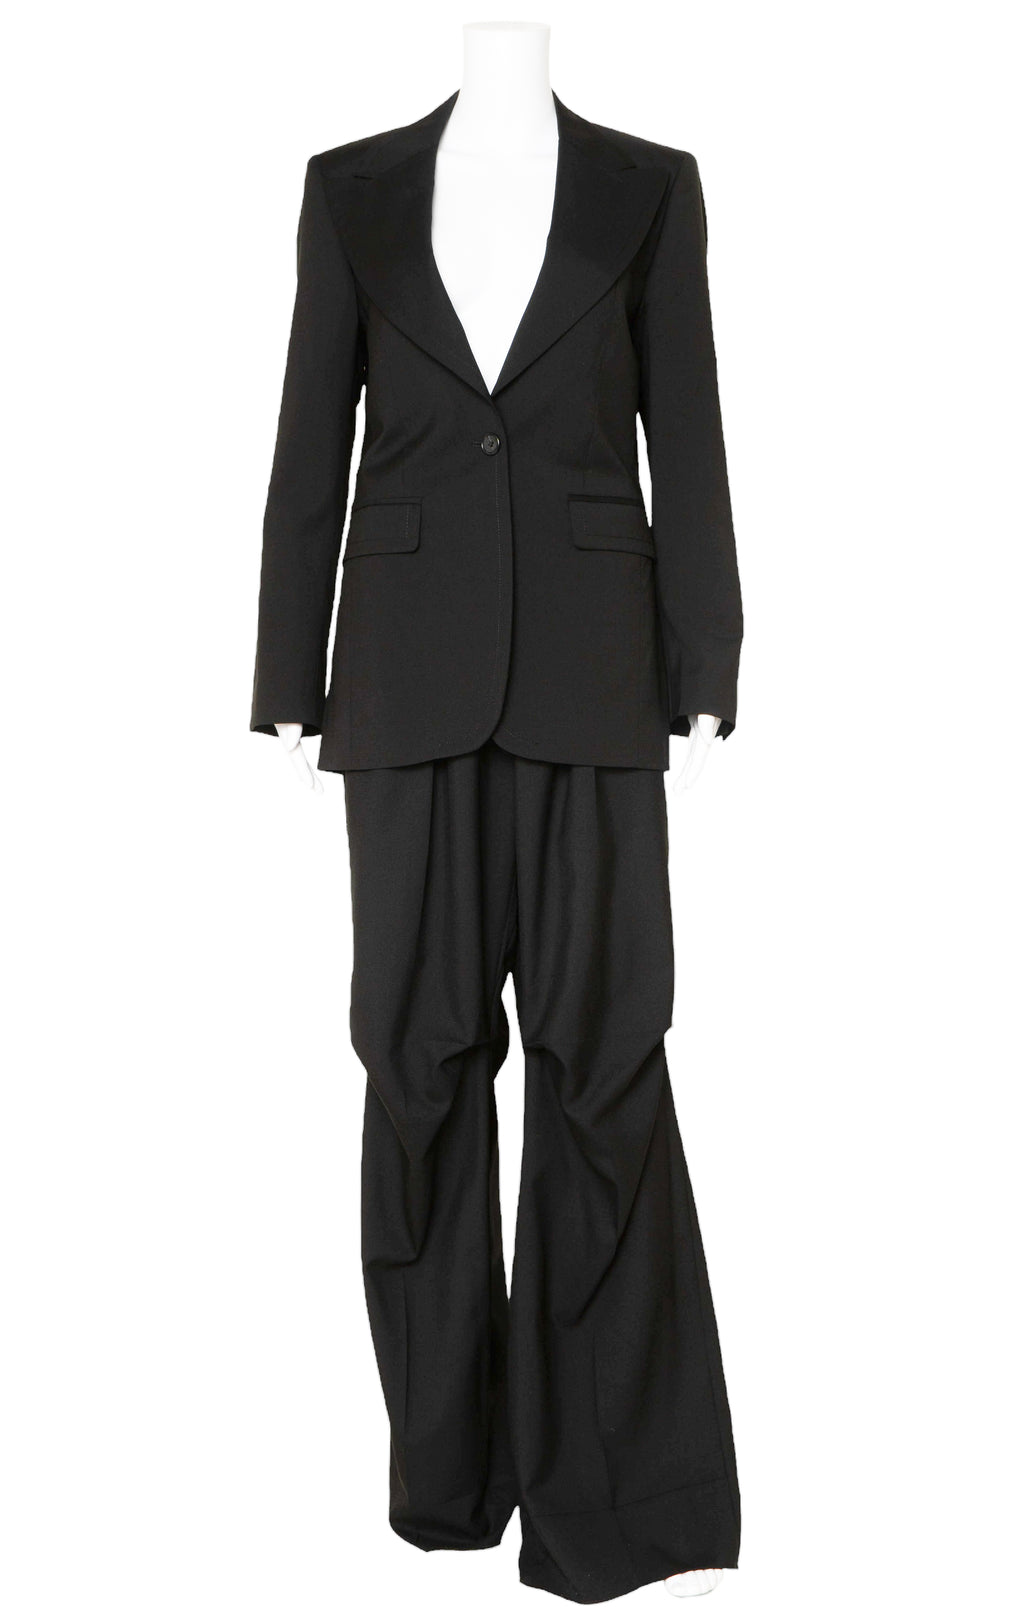 RAF SIMONS (RARE & NEW) with tags Suit Size: IT 40 / Comparable to US 4